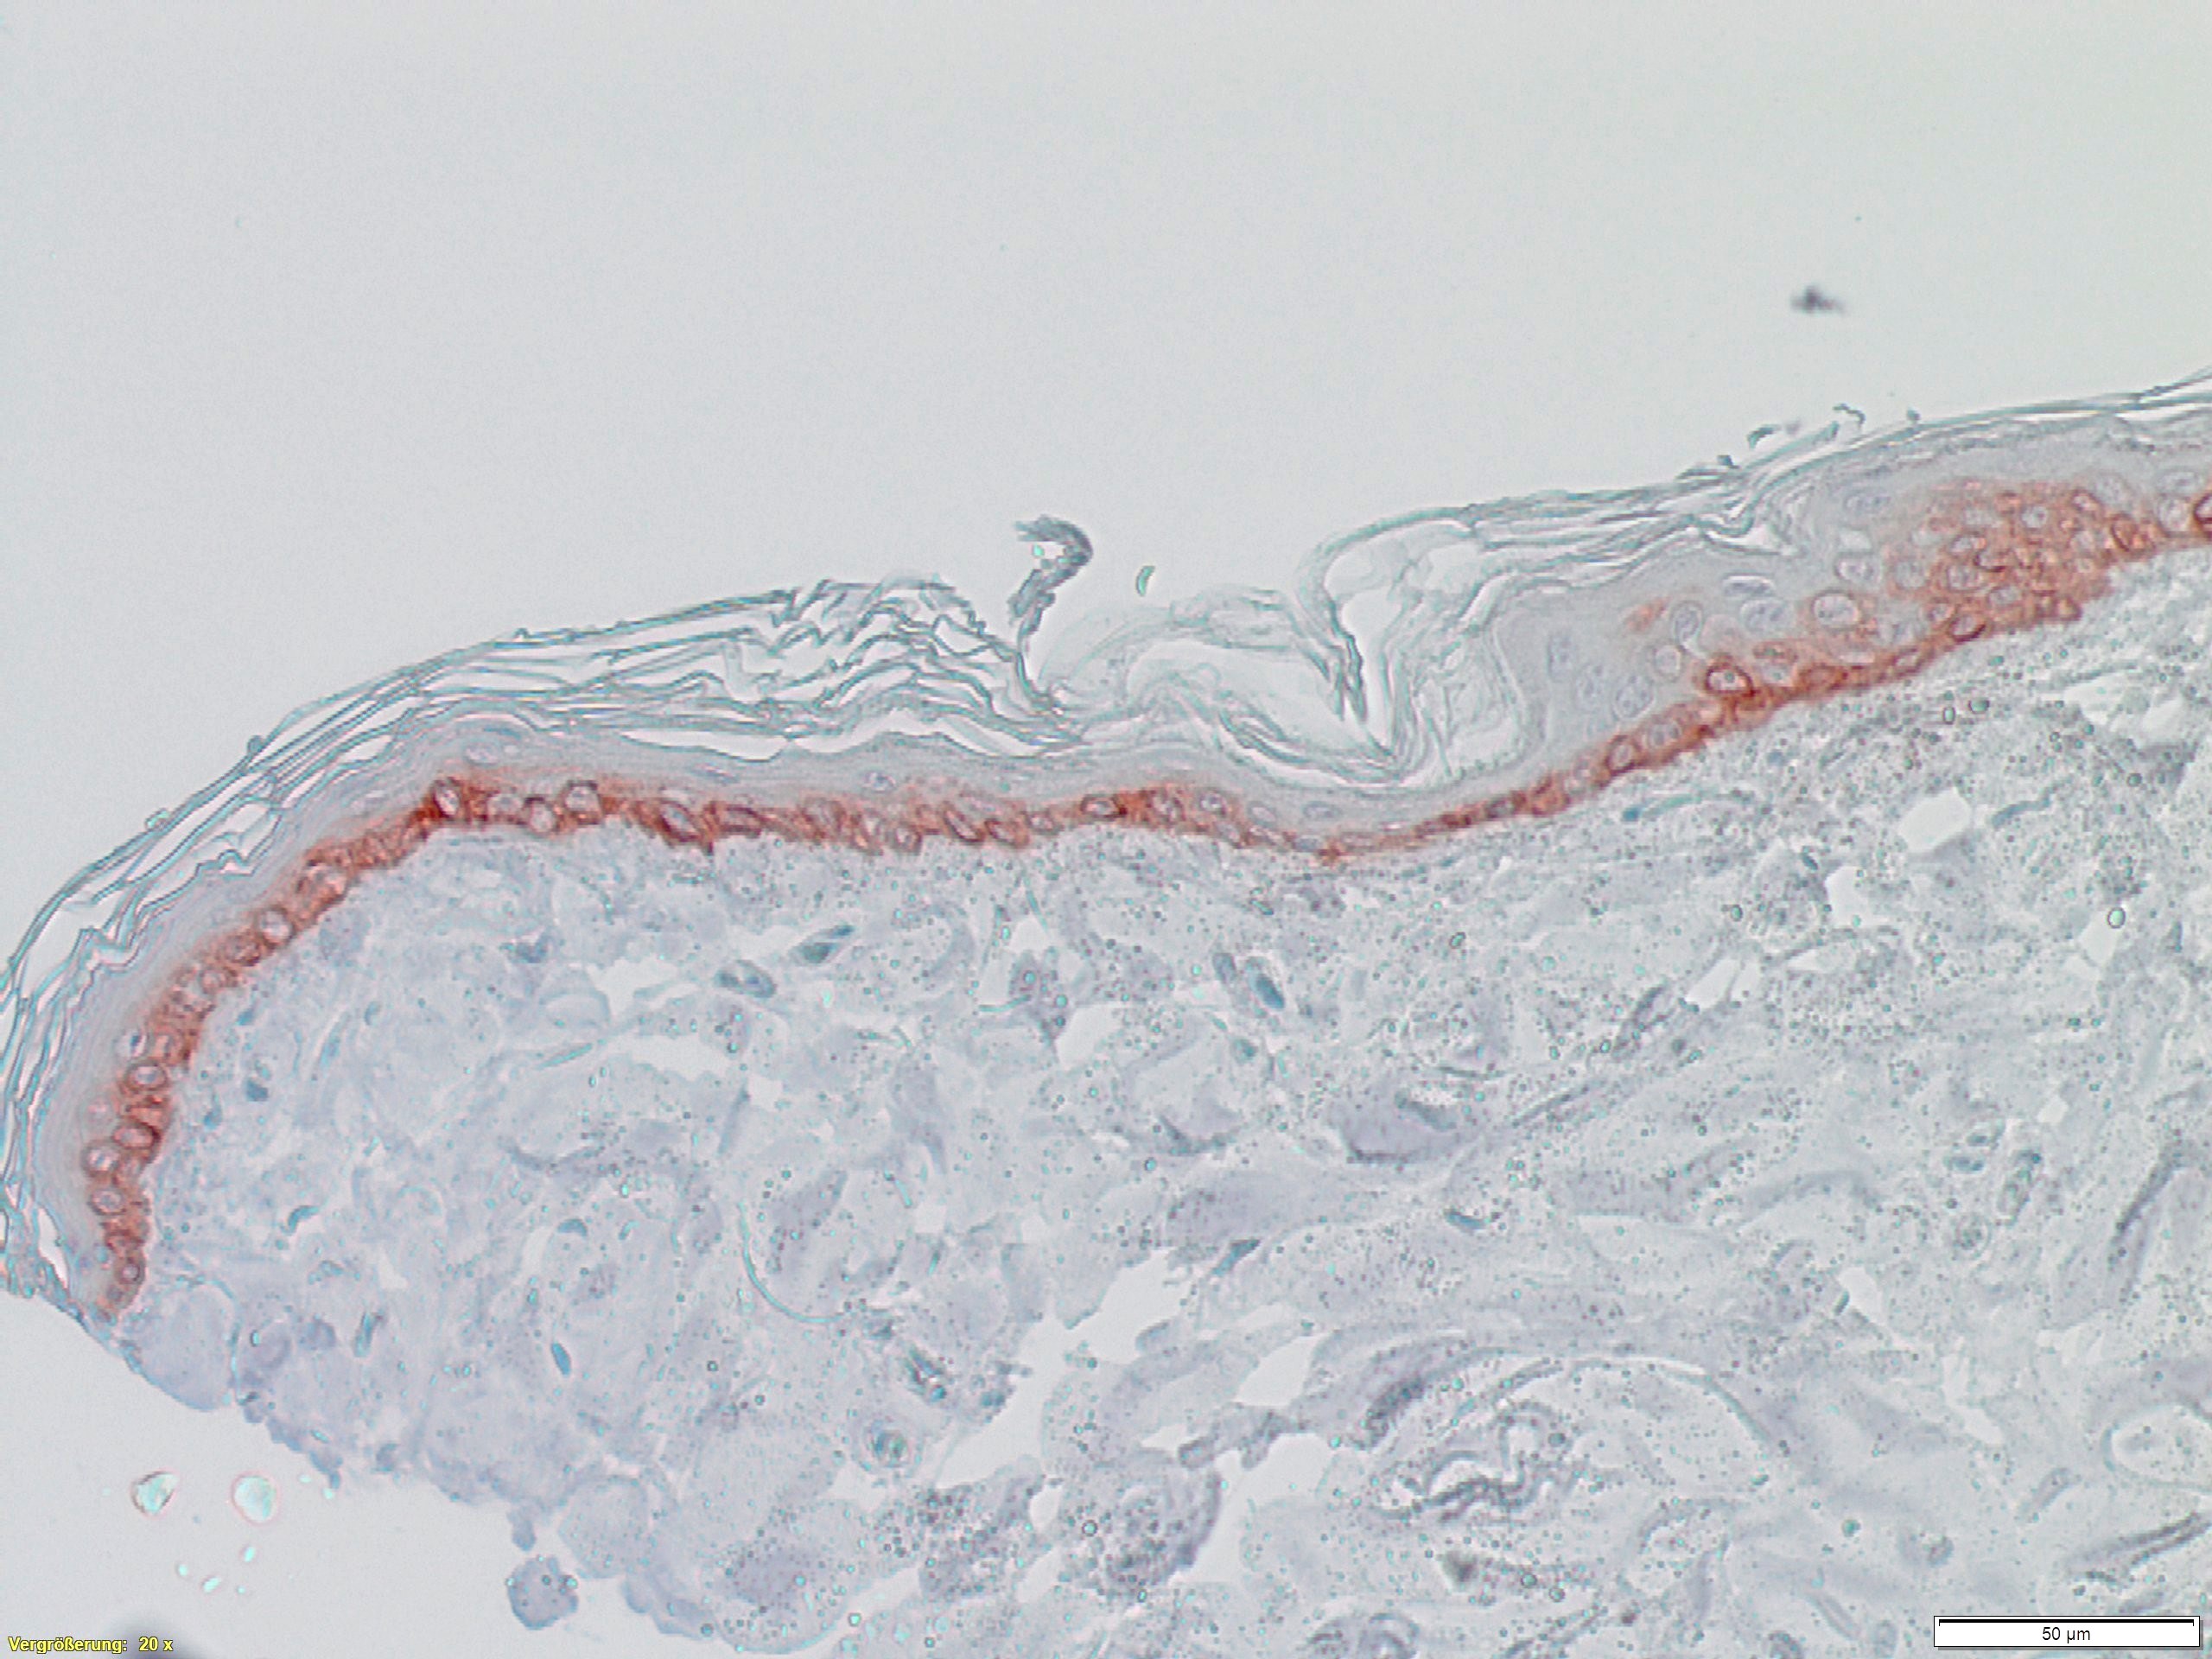 Canine skin, immunohistochemical staining of CK14 (scale bar equals 100 µm)